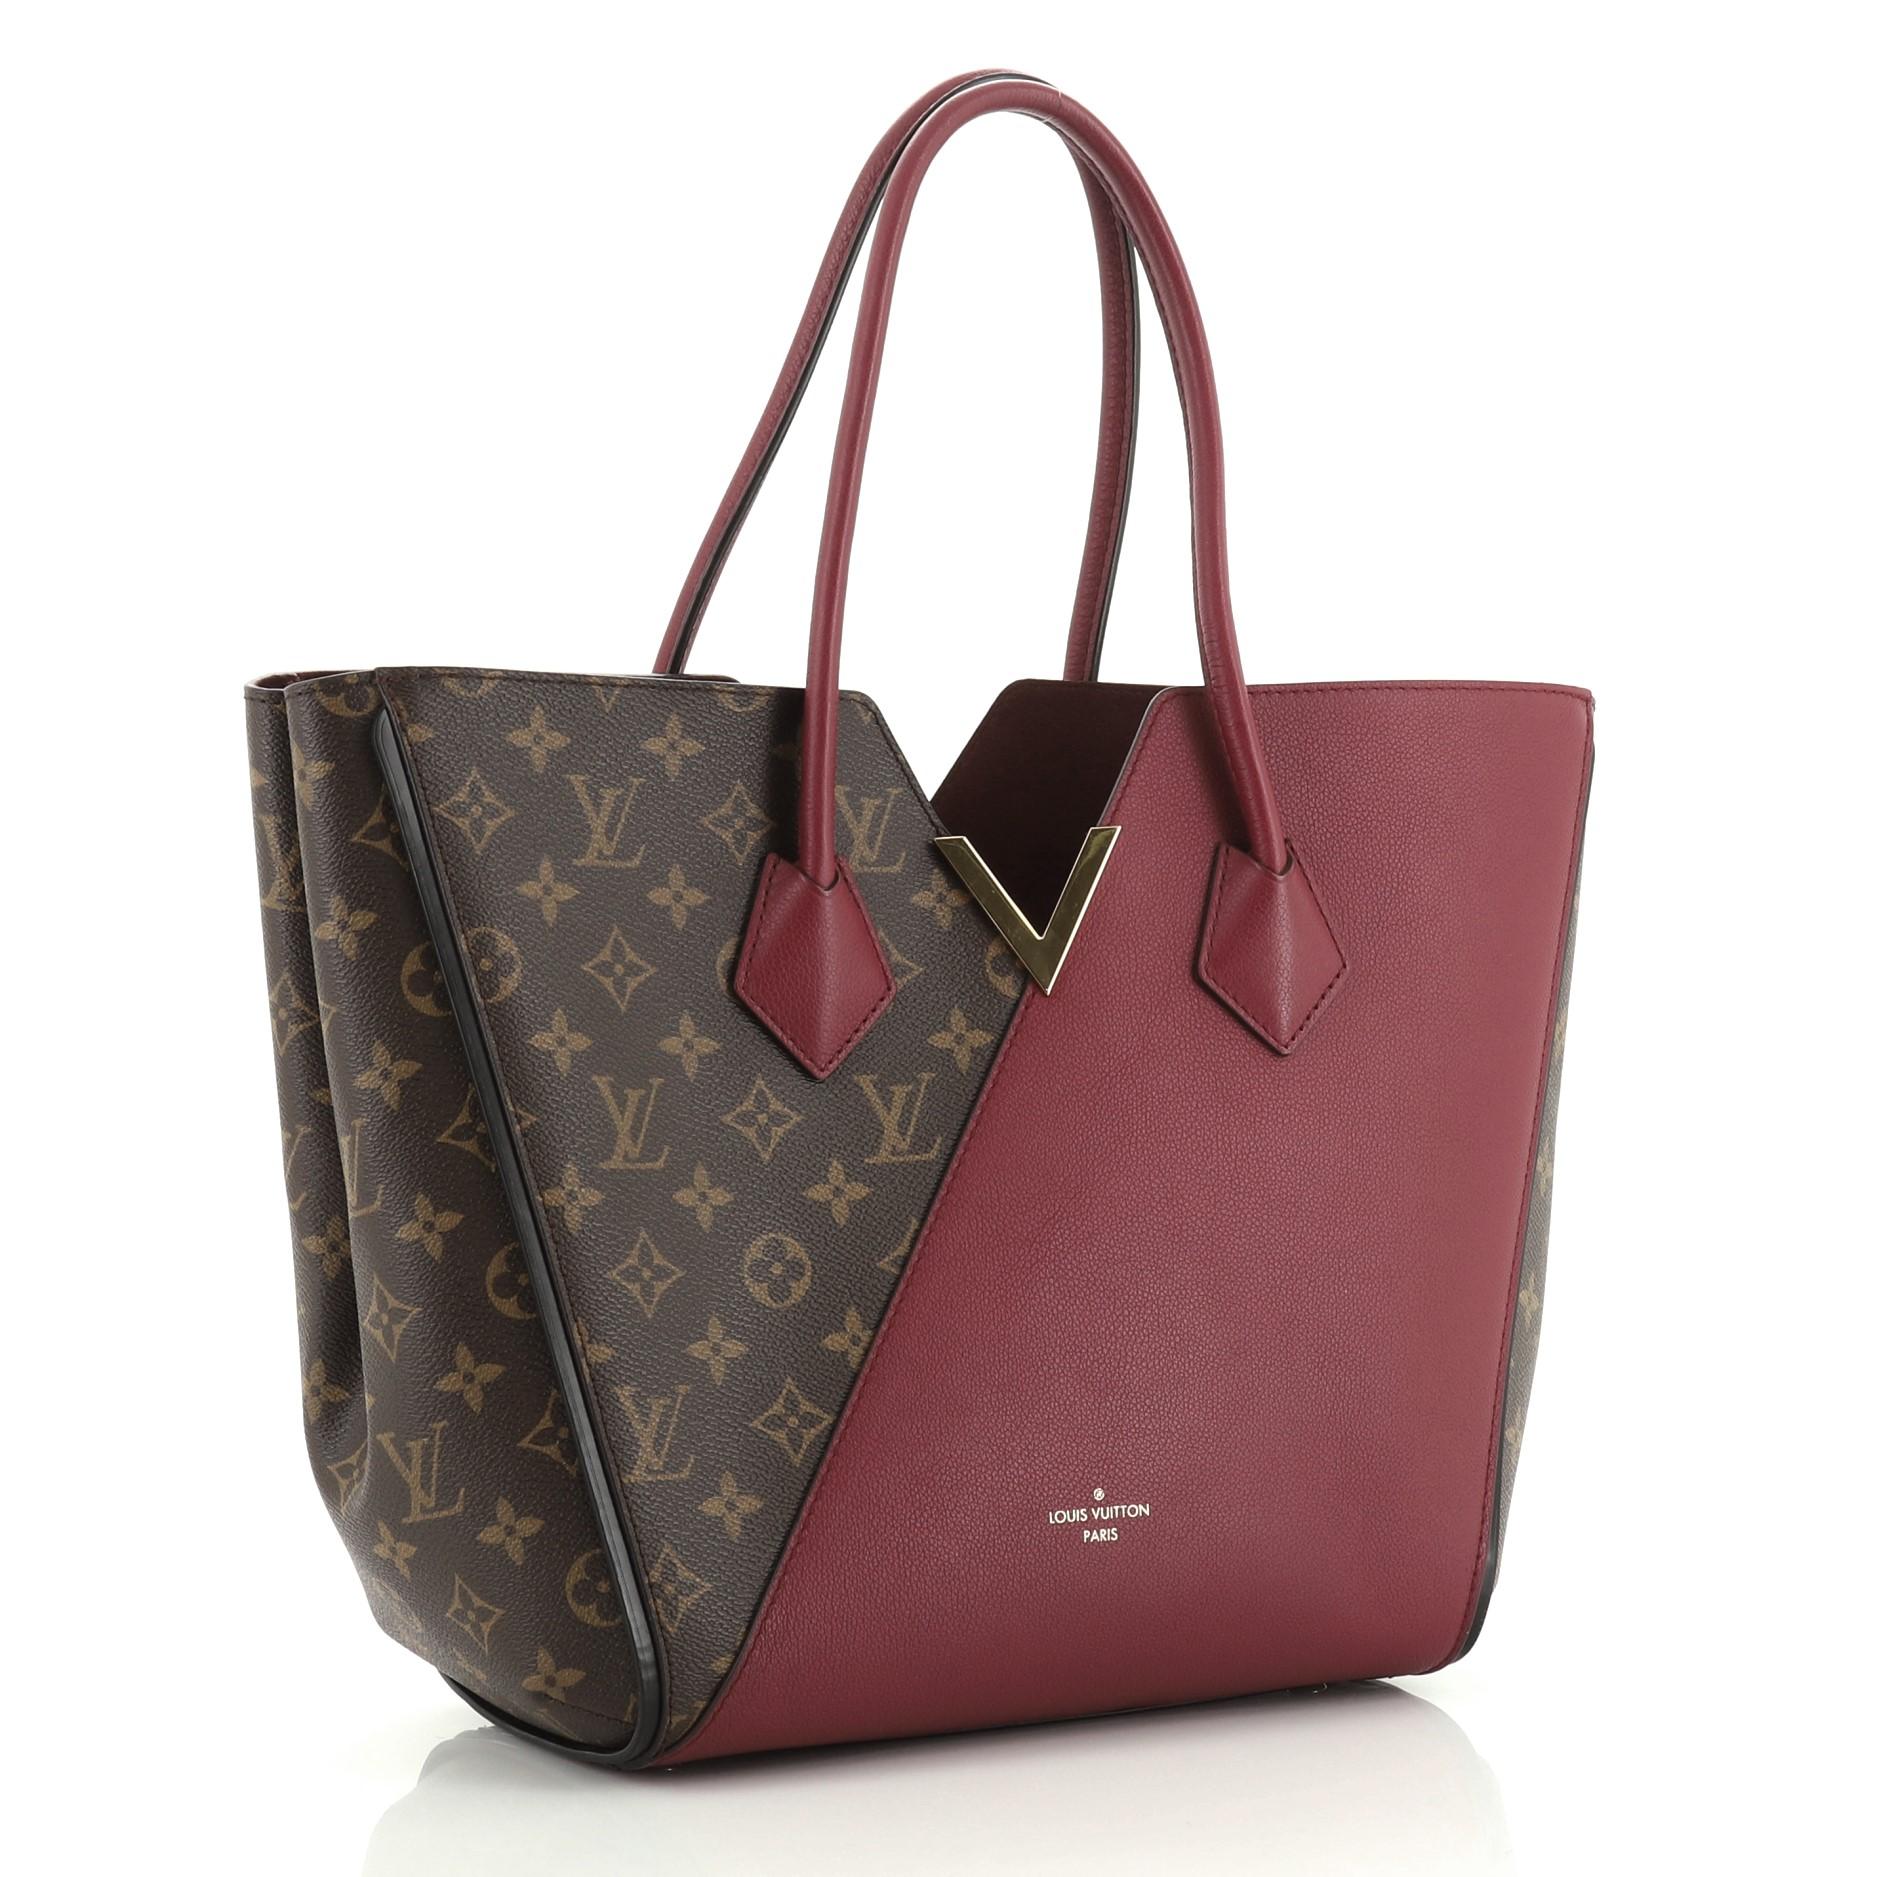 This Louis Vuitton Kimono Handbag Monogram Canvas and Leather MM, crafted from brown monogram coated canvas and red leather, features dual rolled handles, metallic V-cross accent, and gold-tone hardware. Its wide top with hook-clasp closure opens to